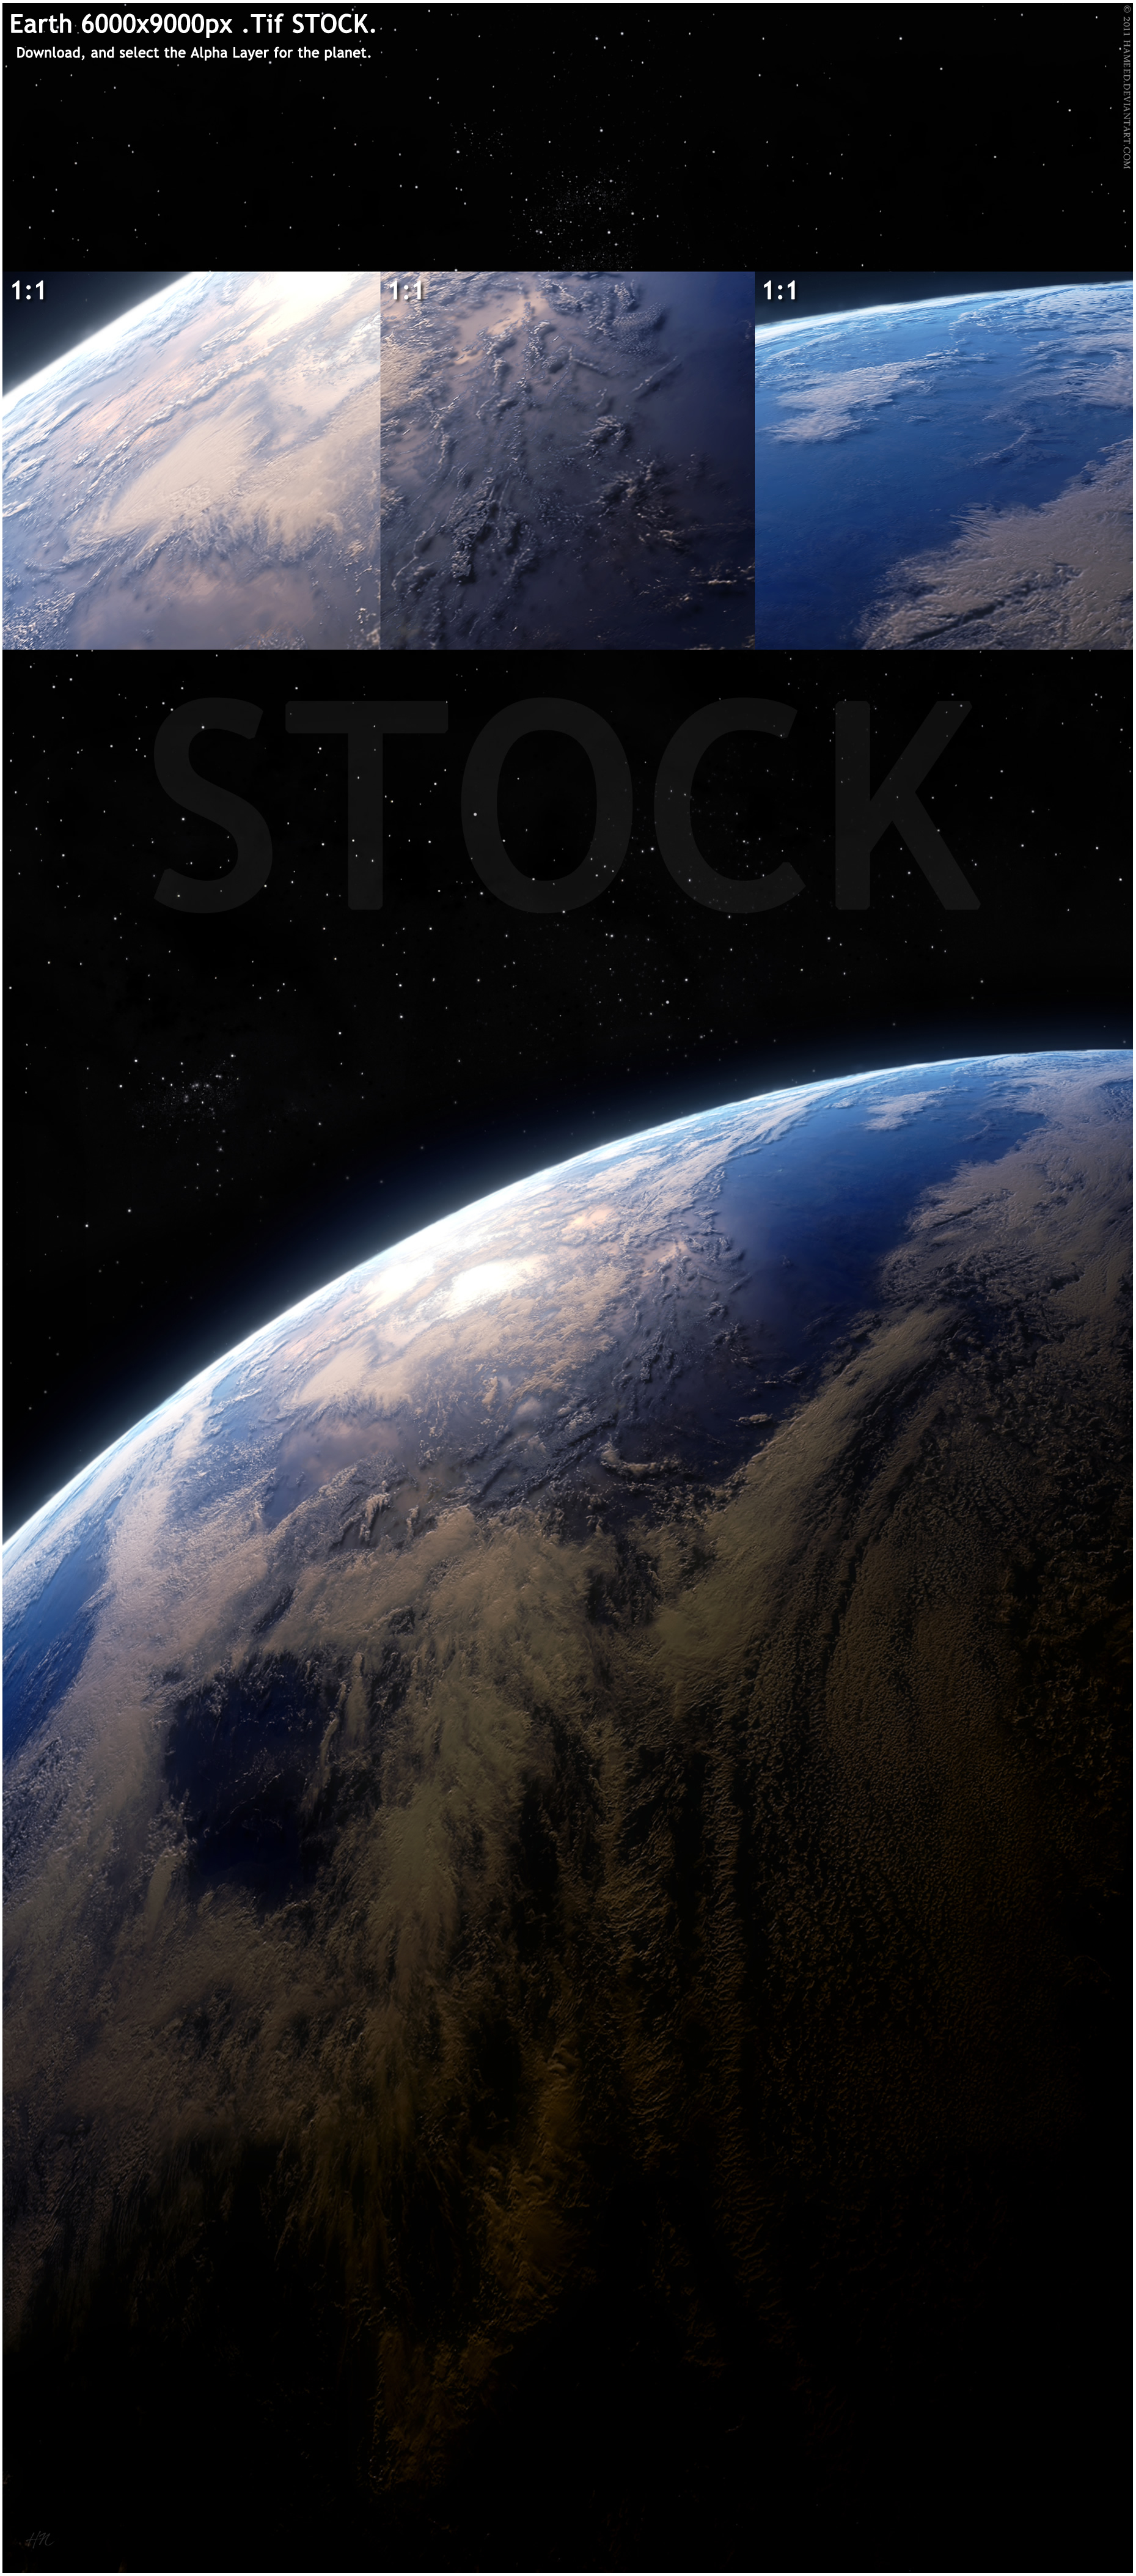 Earth 6000x9000px Stock